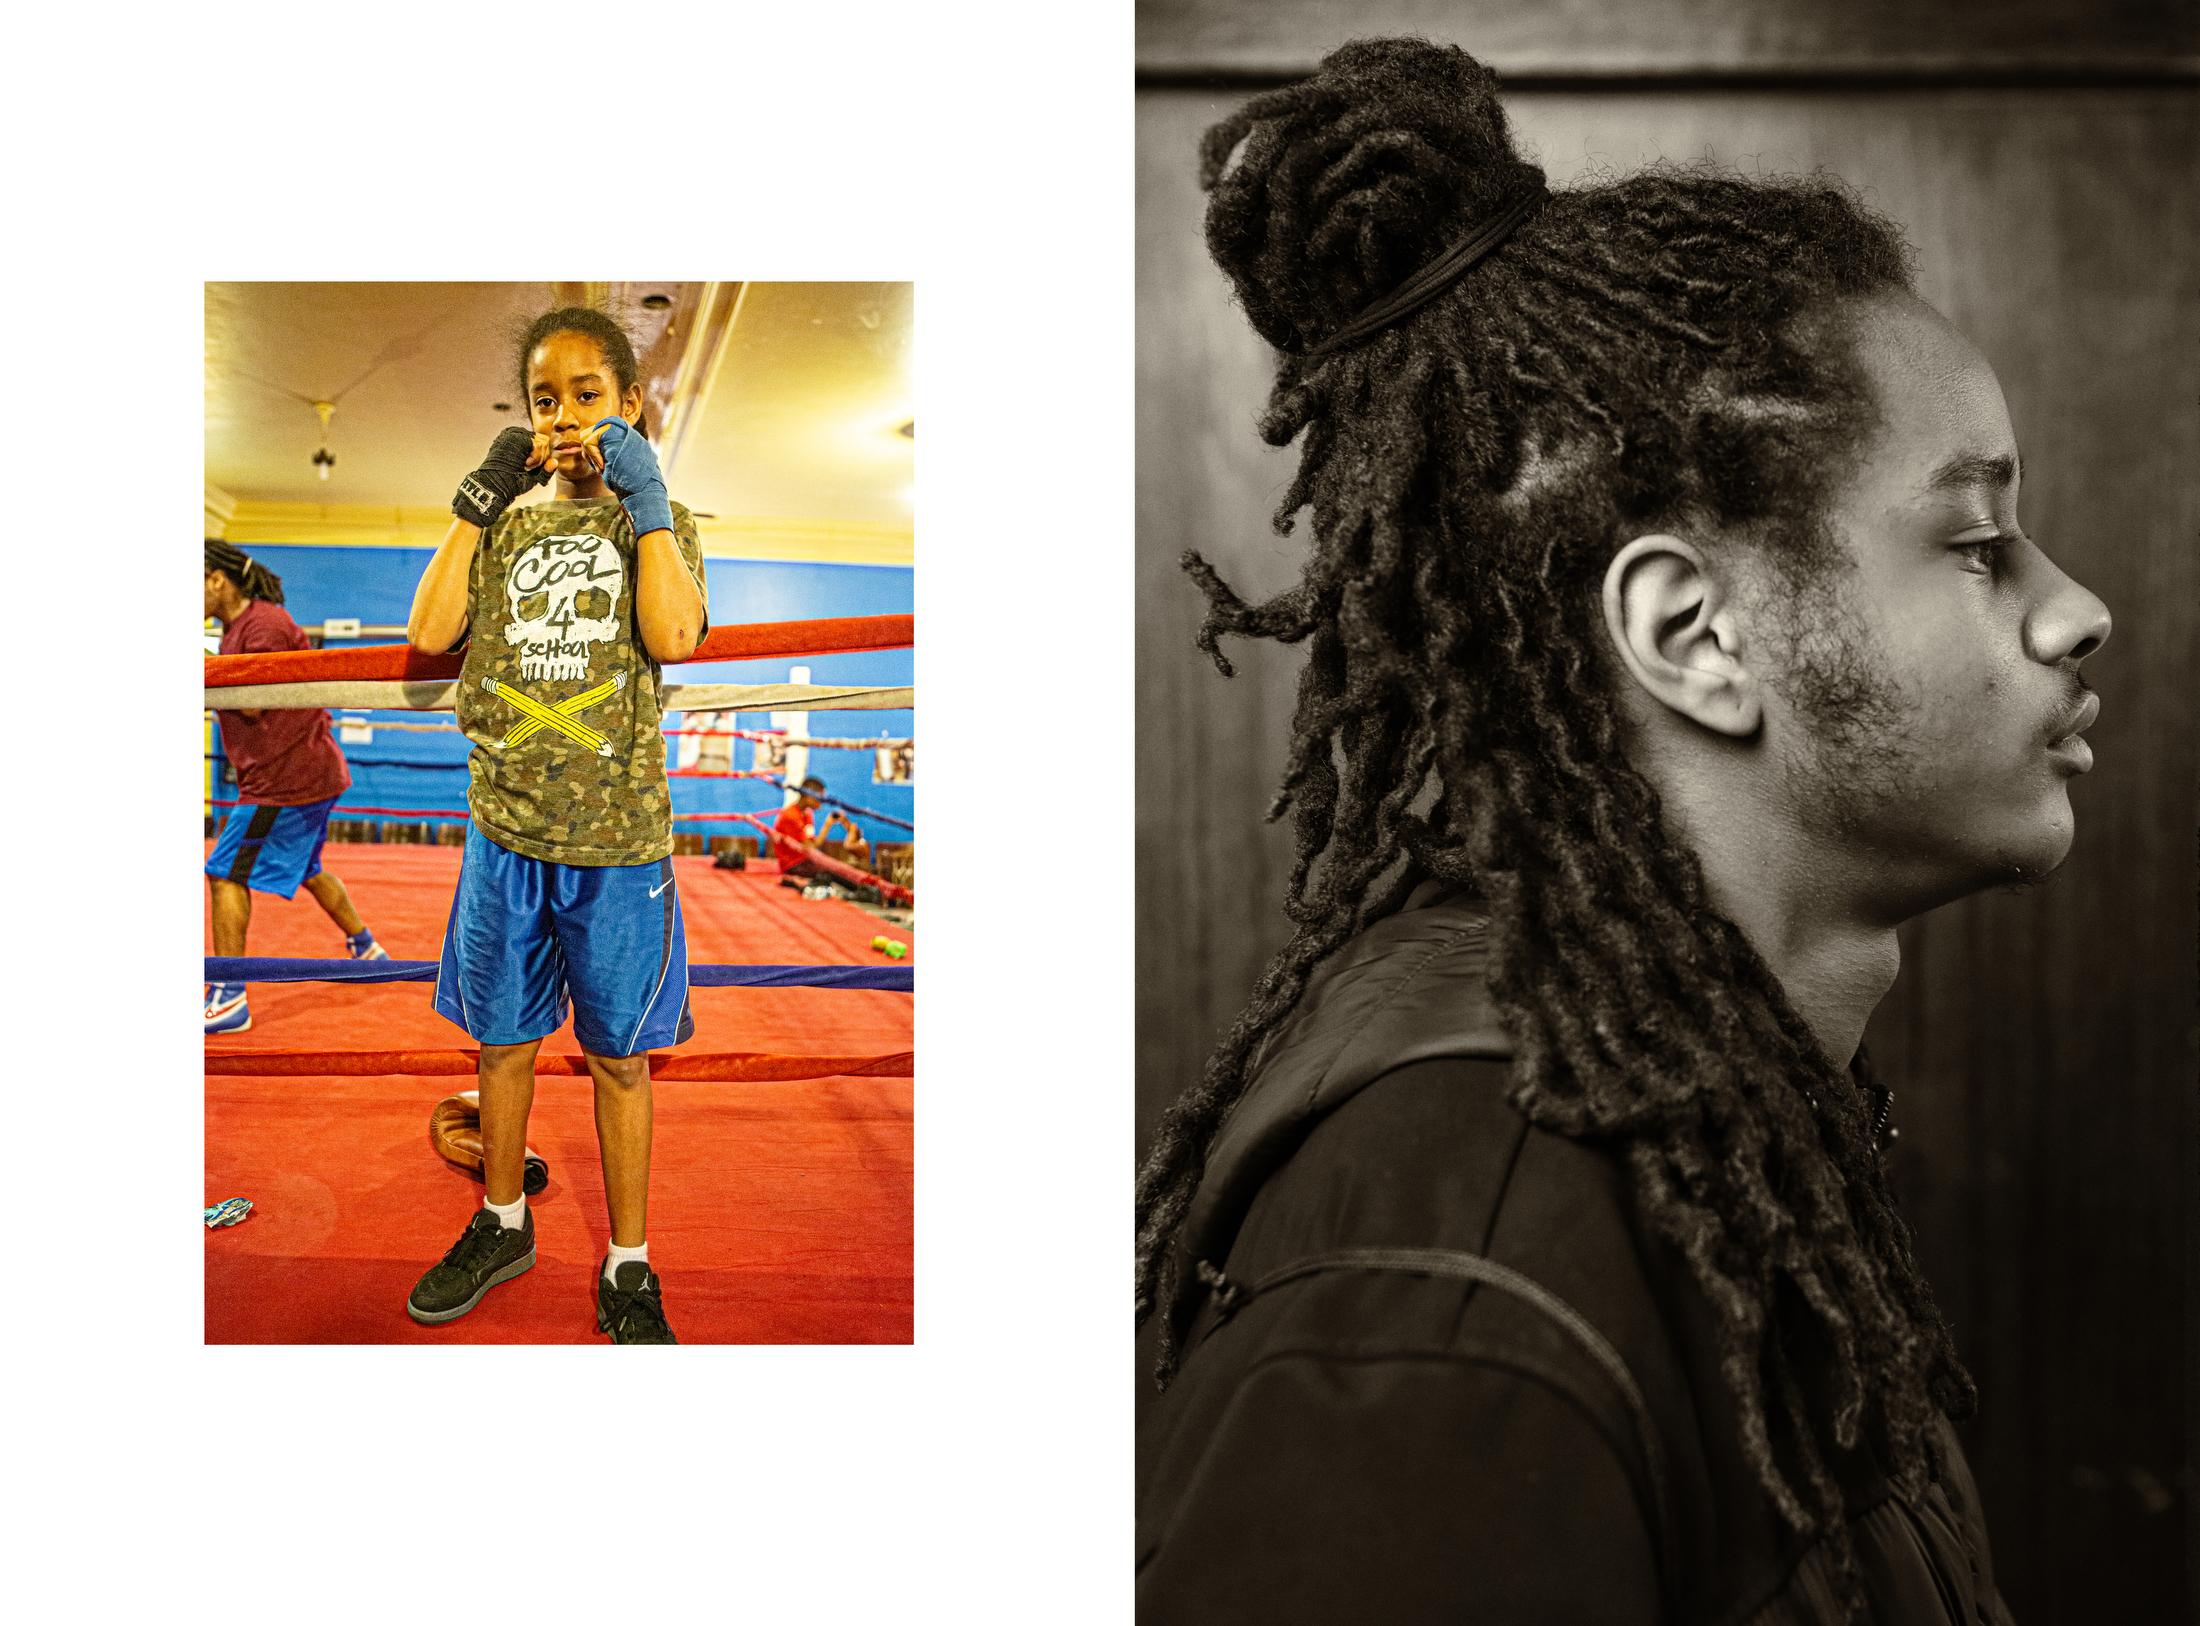 10 years in a boxing gym - Sir Jayden